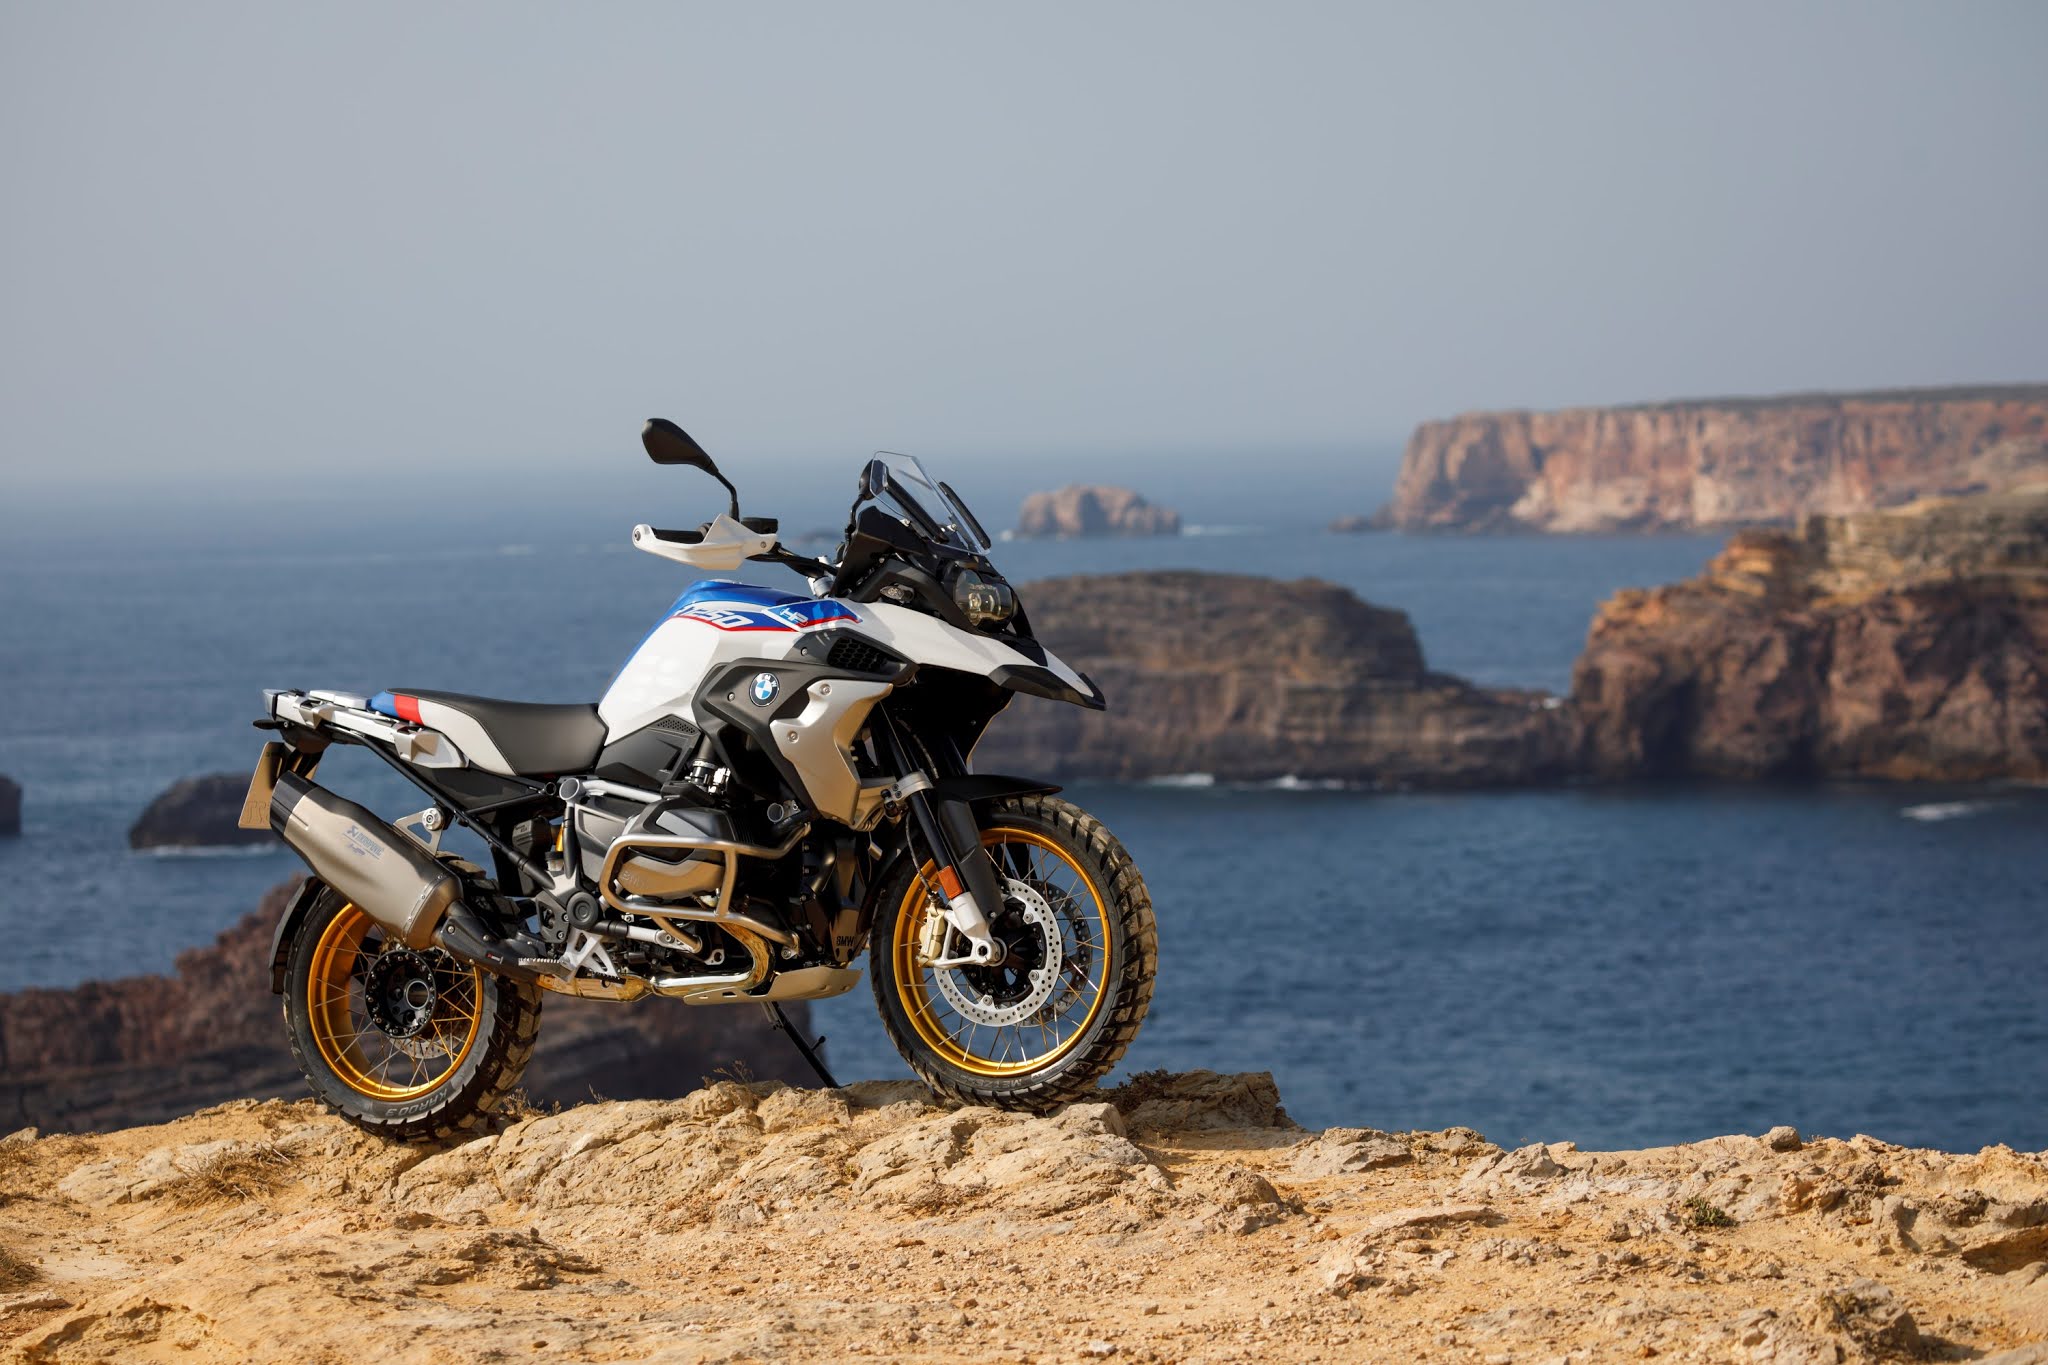 Bmw R 1250 Gs Price In India Mileage Specifications Colors Top Speed And Servicing Periods